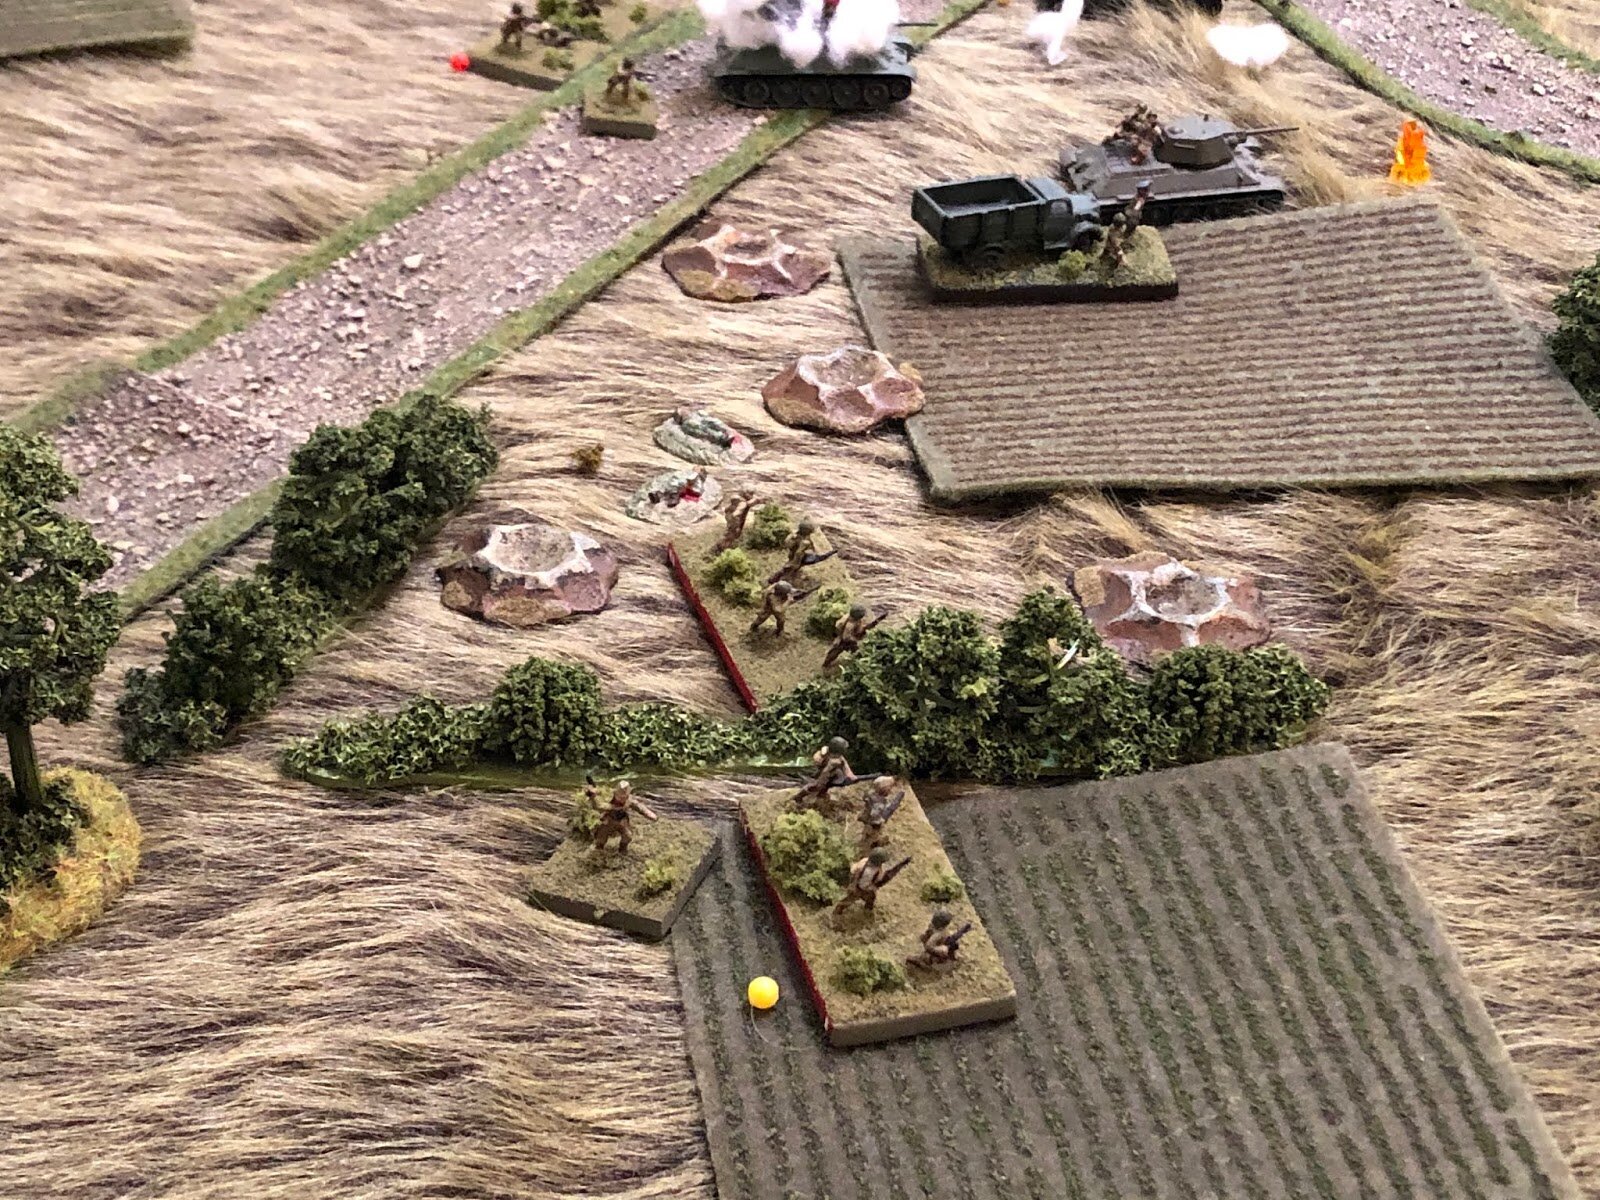  In the center, the Soviet commander of 1st Platoon moves over, under heavy fire, and rallies his last pinned squad. 